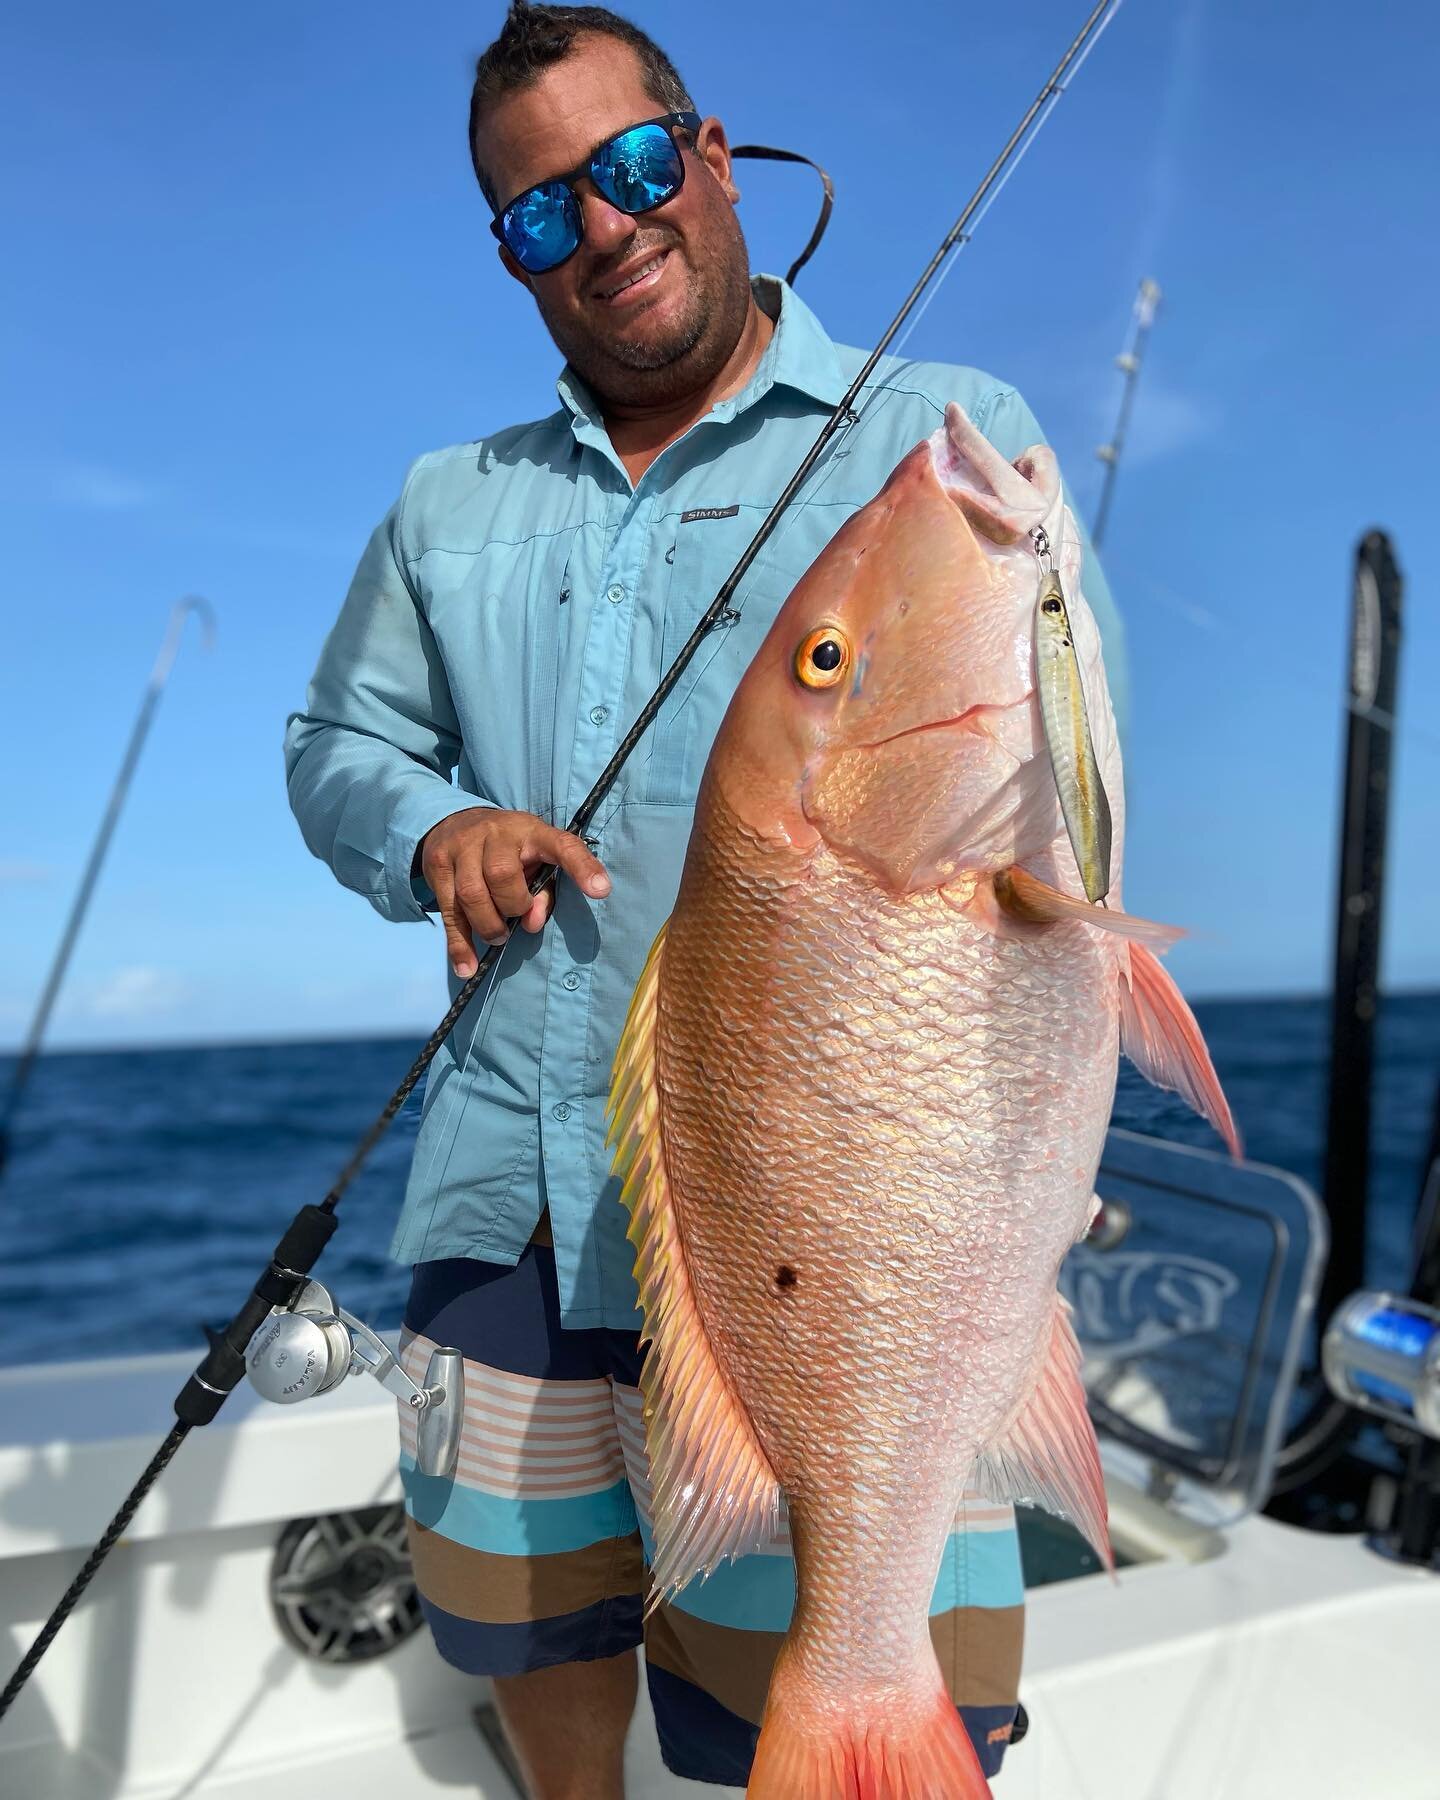 Some of the slow pitch action in the Bahamas. We had so much fun bouncing around the island, catching a few fish, and even crossed a few off the list&mdash;like Ozzie&rsquo;s Yellow Fin Grouper. Definitely another one for the books, just being pirate